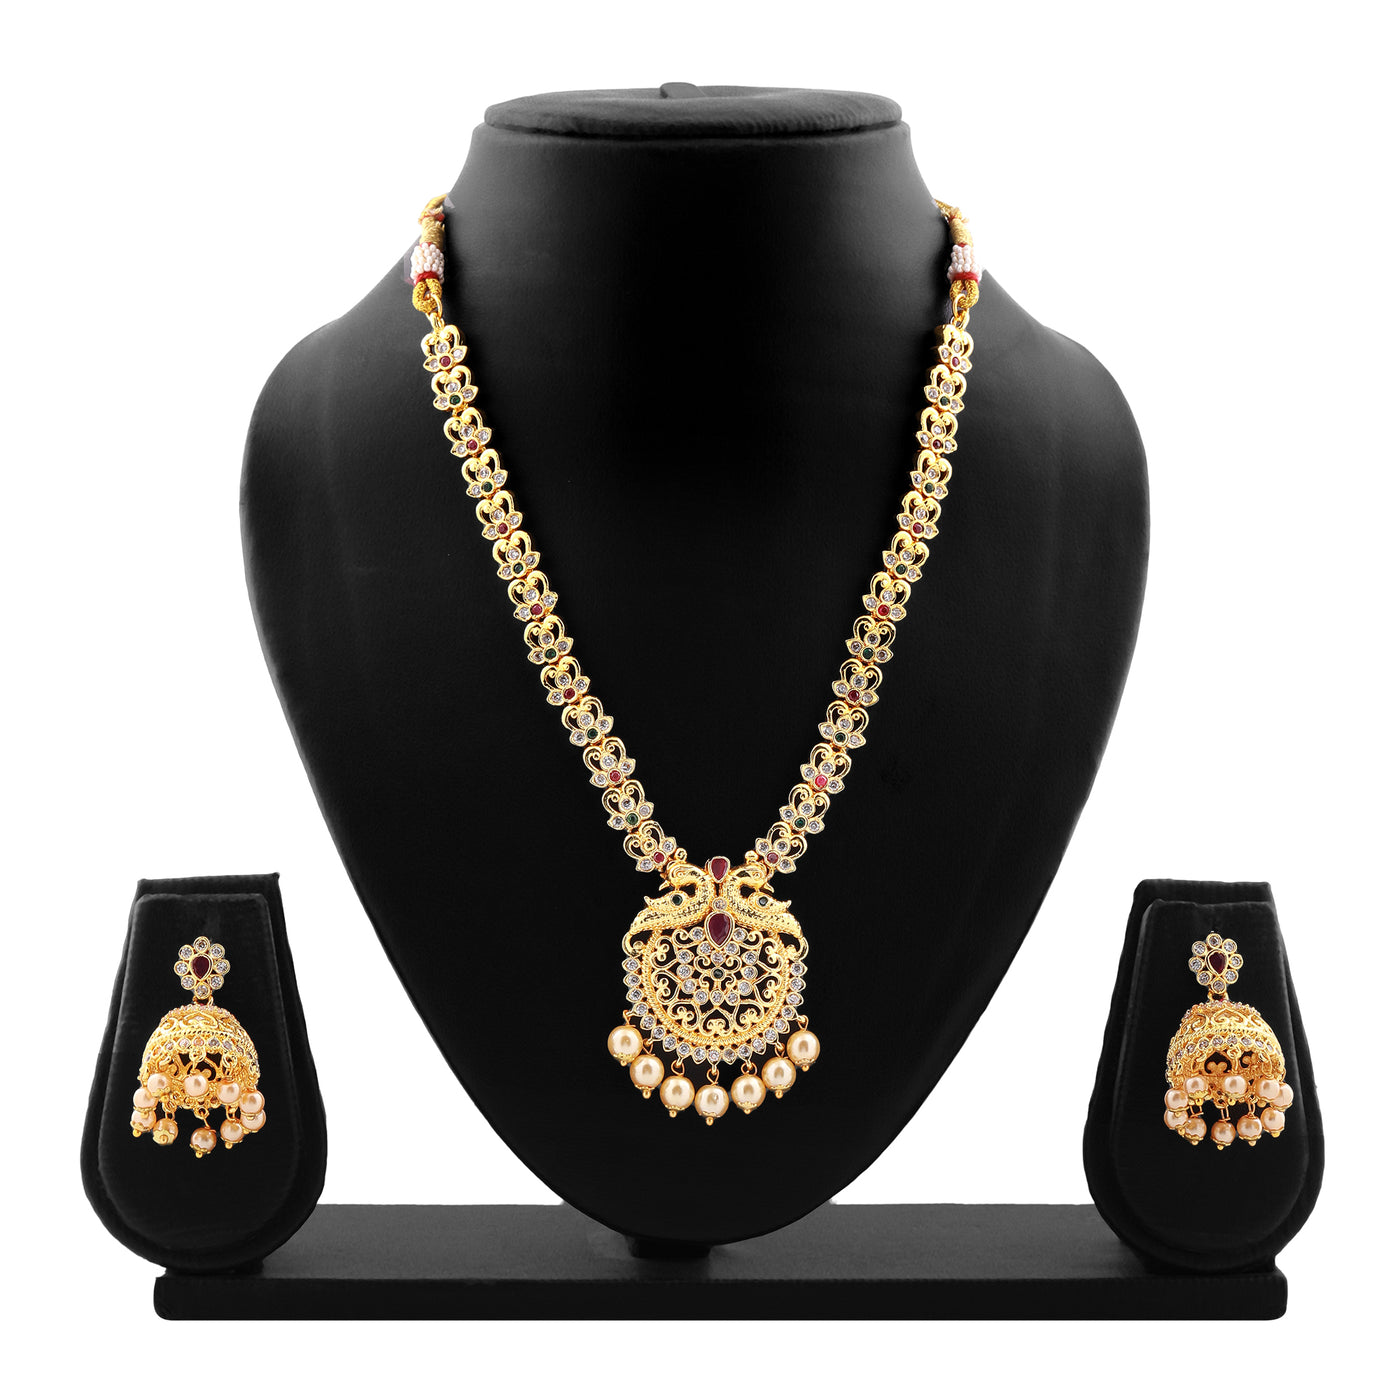 Estele Gold plated CZ Peacock inspired Bridal long Necklace set with color stones & pearls for Women